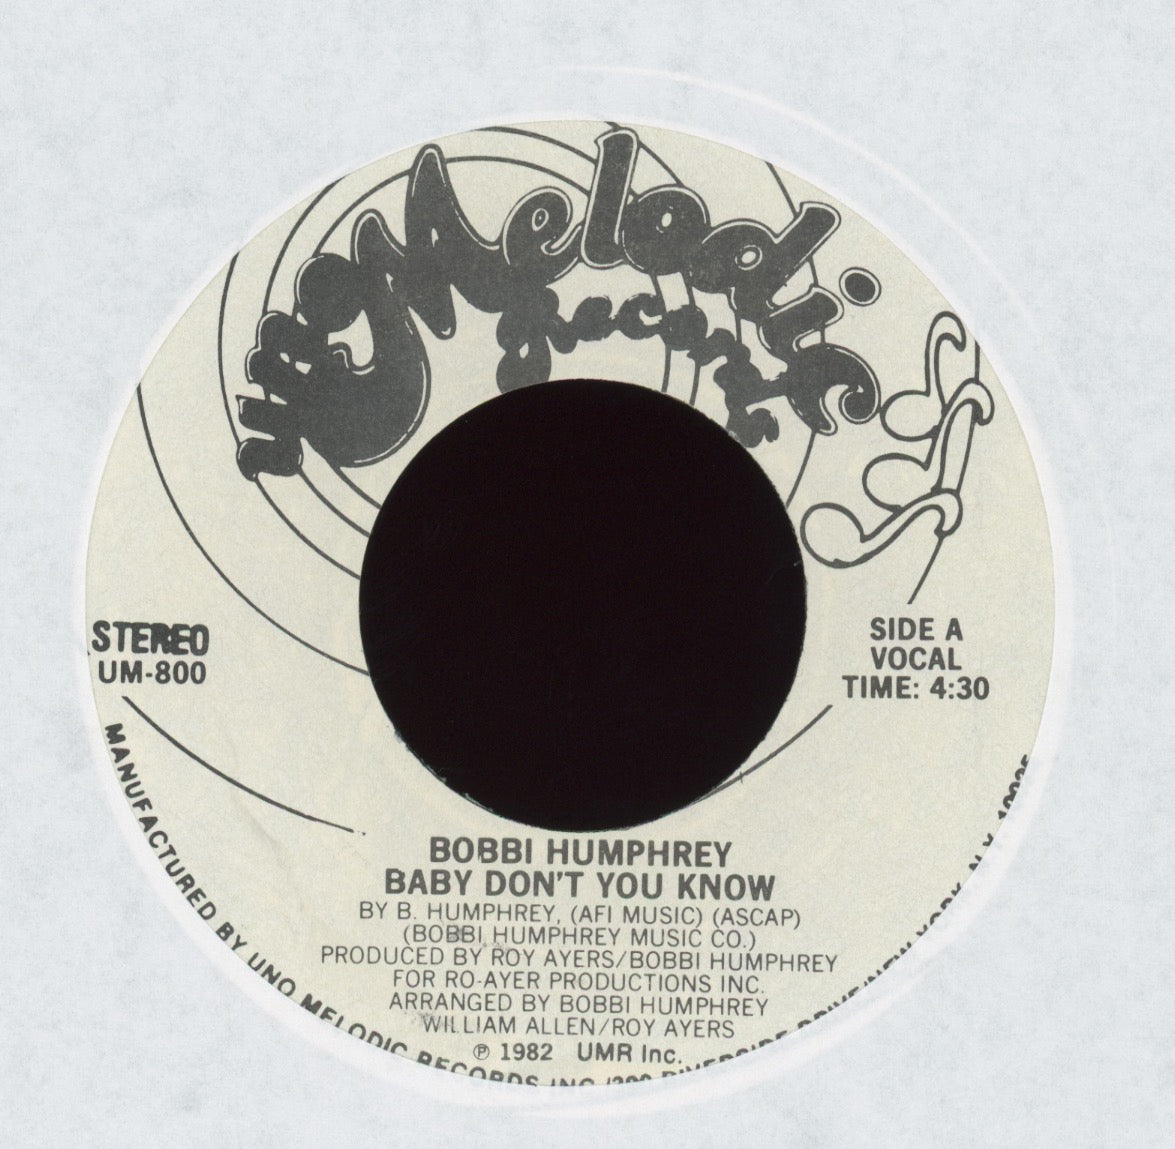 Bobbi Humphrey - Baby Don't You Know on Uno Melodic Promo With Press Release